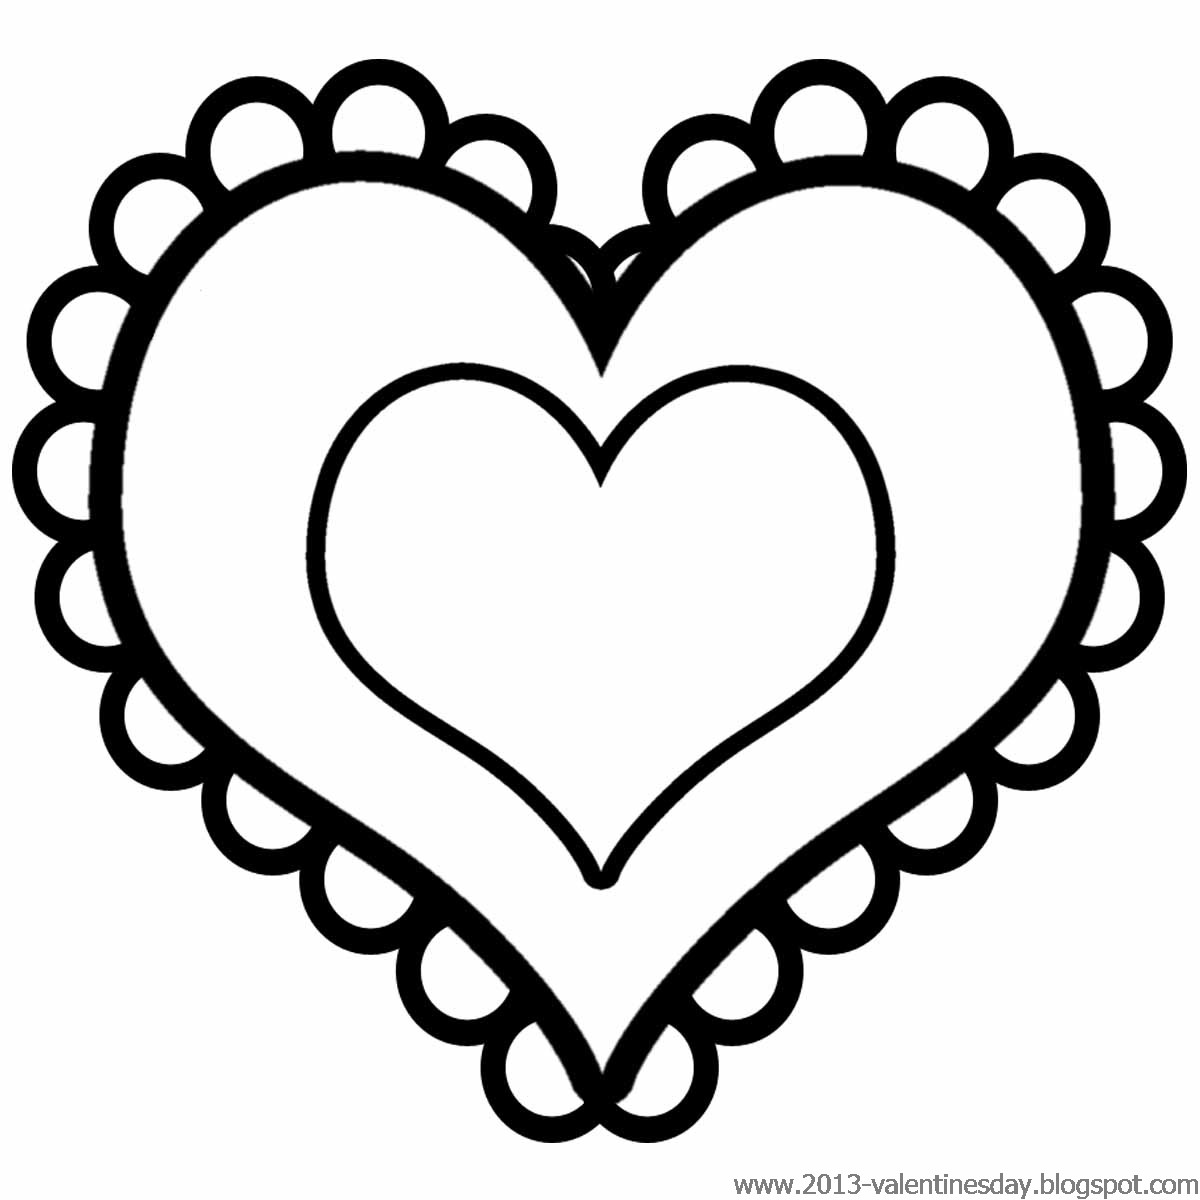 Pics For > Love Heart Clipart Black And White